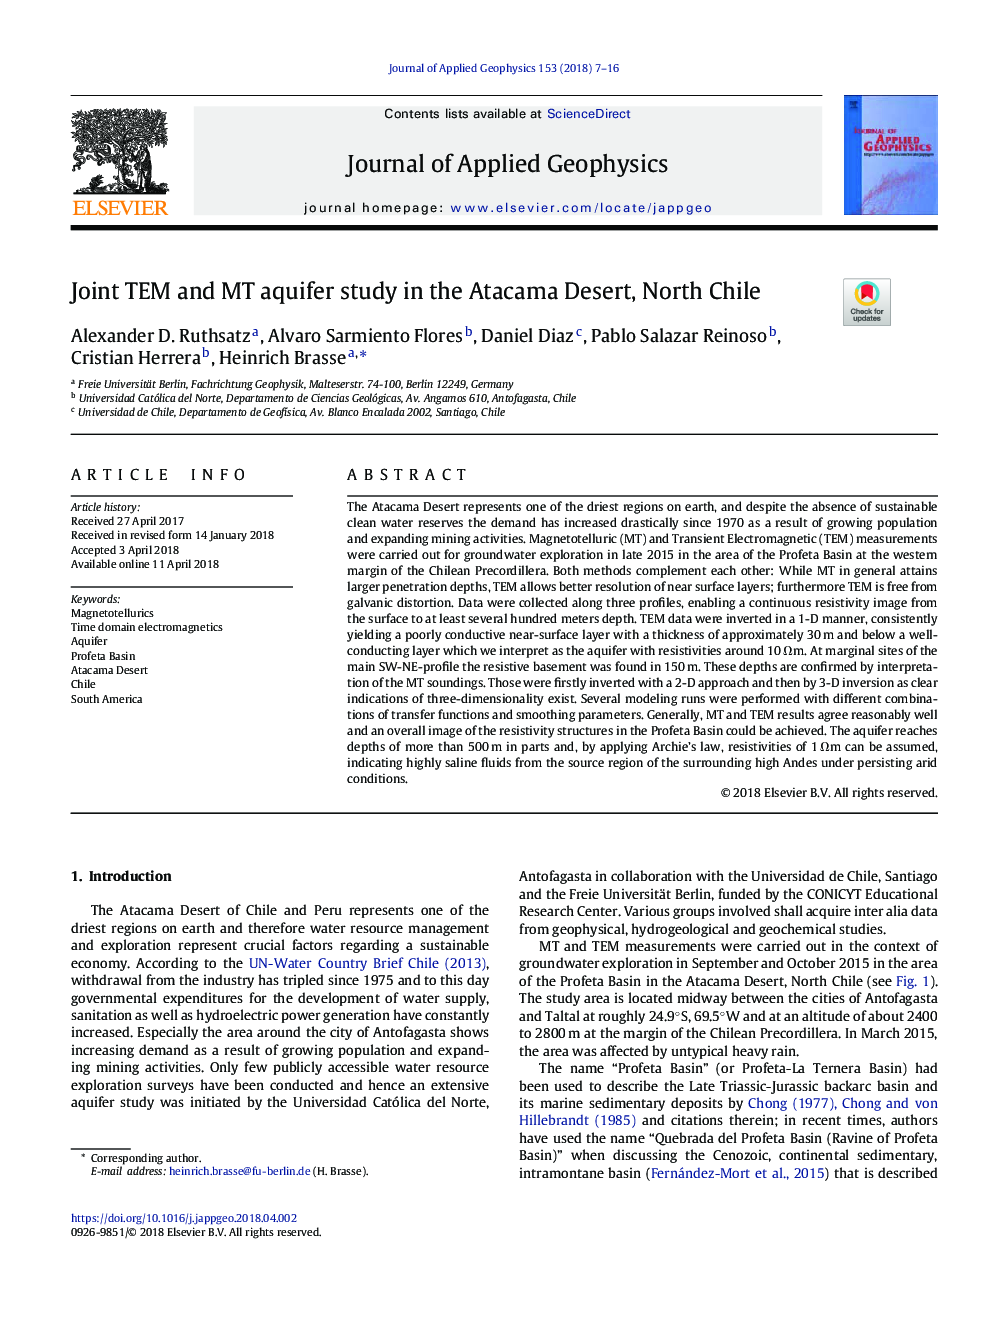 Joint TEM and MT aquifer study in the Atacama Desert, North Chile